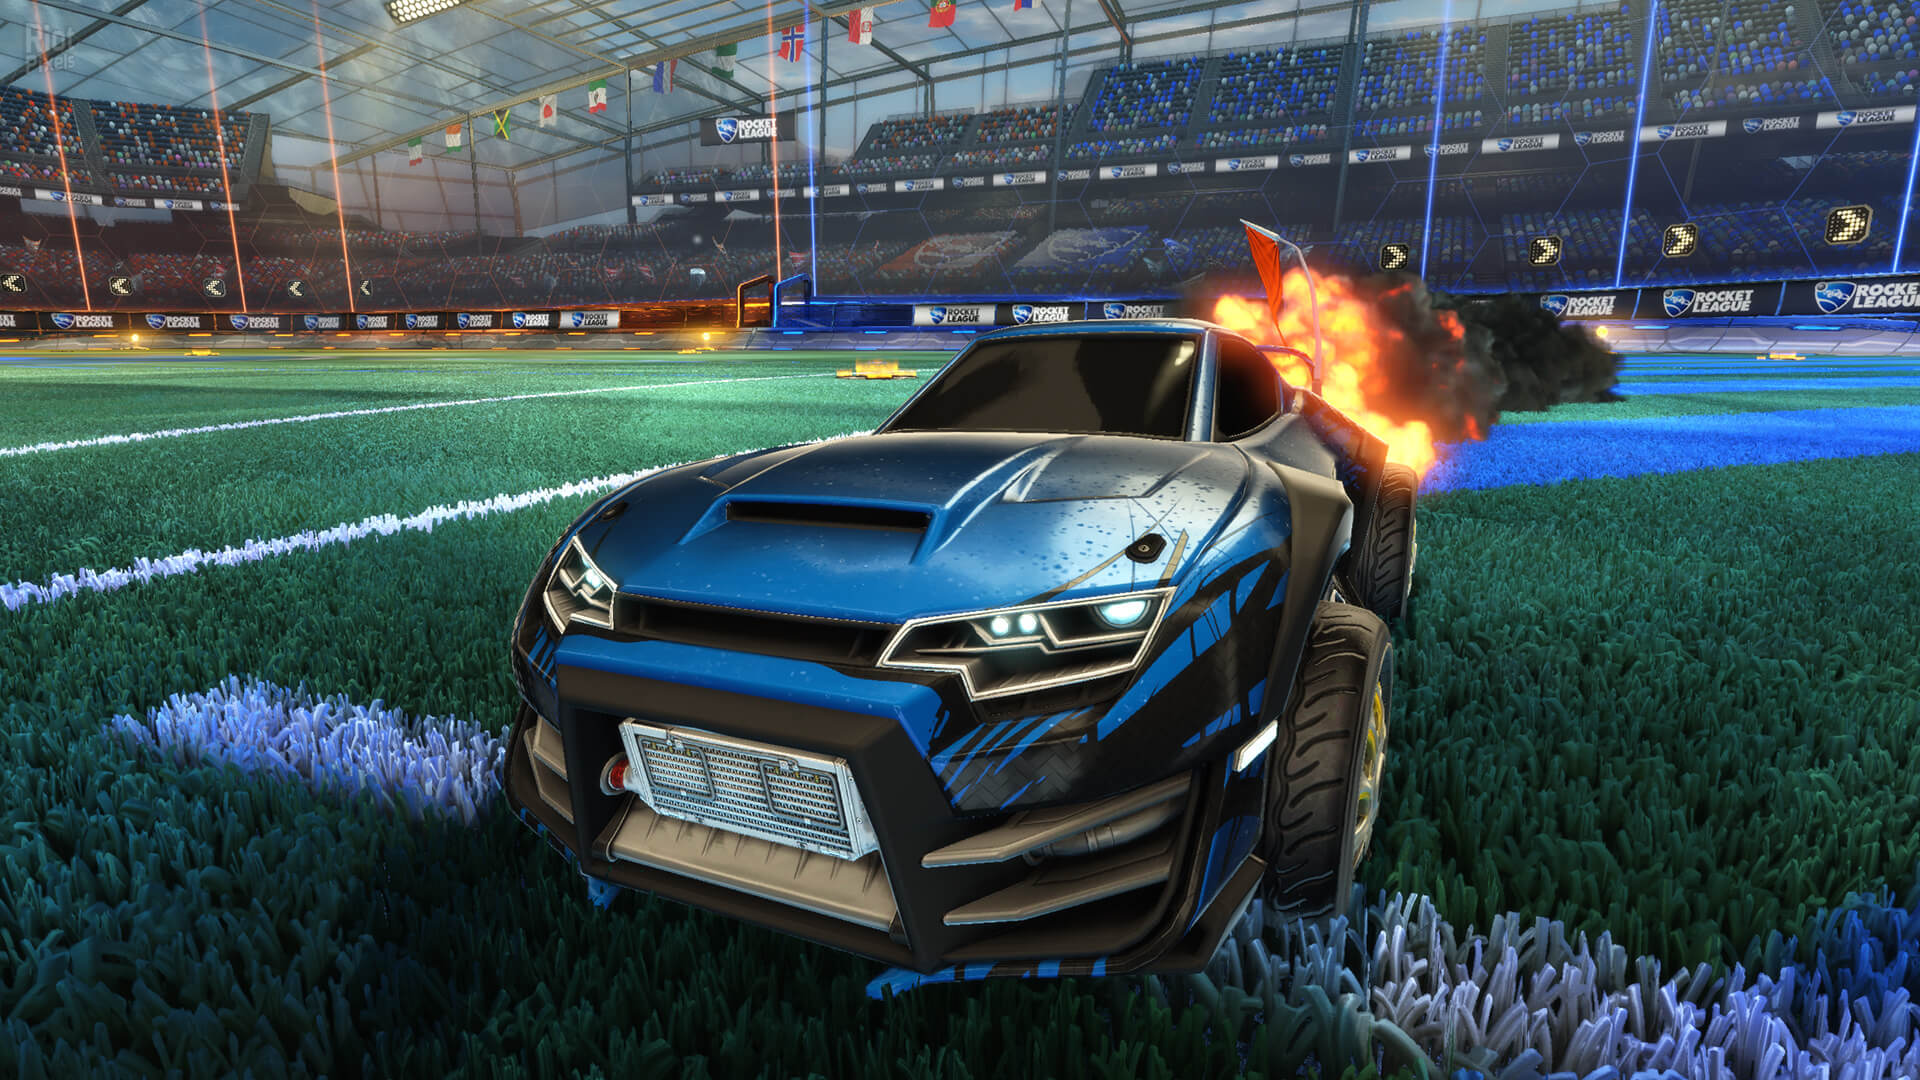 Download Rocket League Highly Compressed For PC in 500 MB Parts - TraX Gaming Center